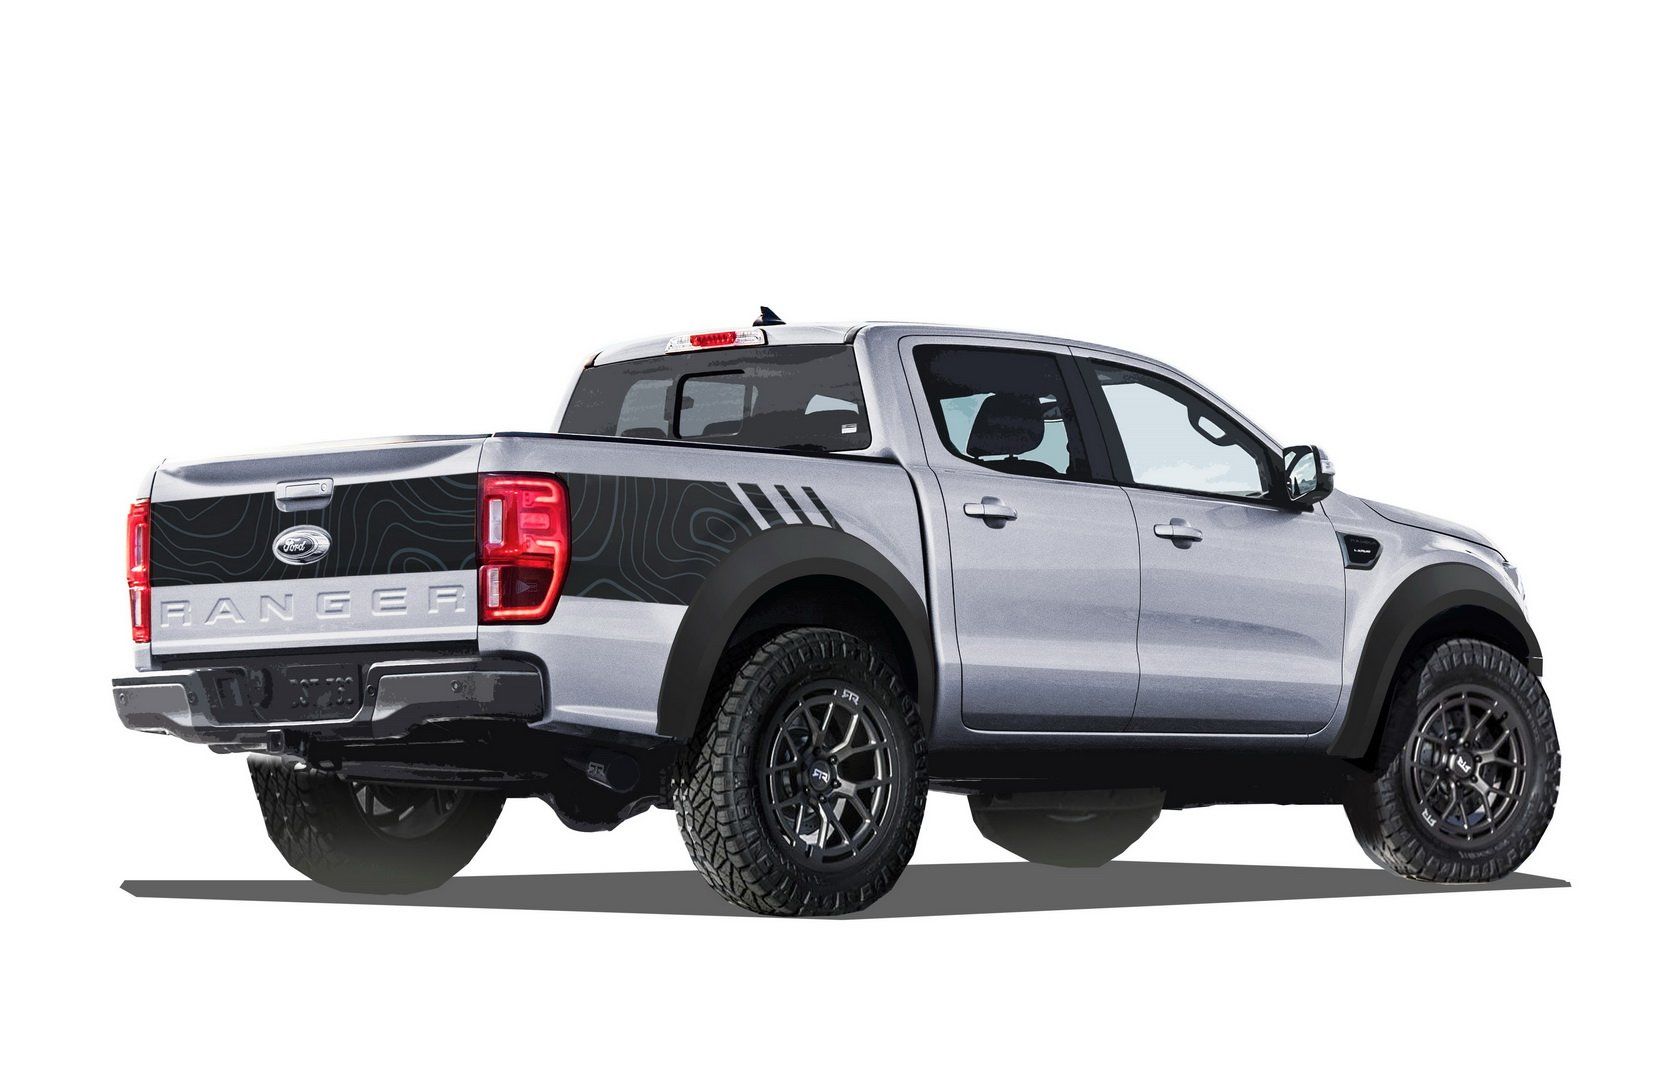 RTR Ford Ranger Brings Off-Road Dominance To Mid-Size Pickup